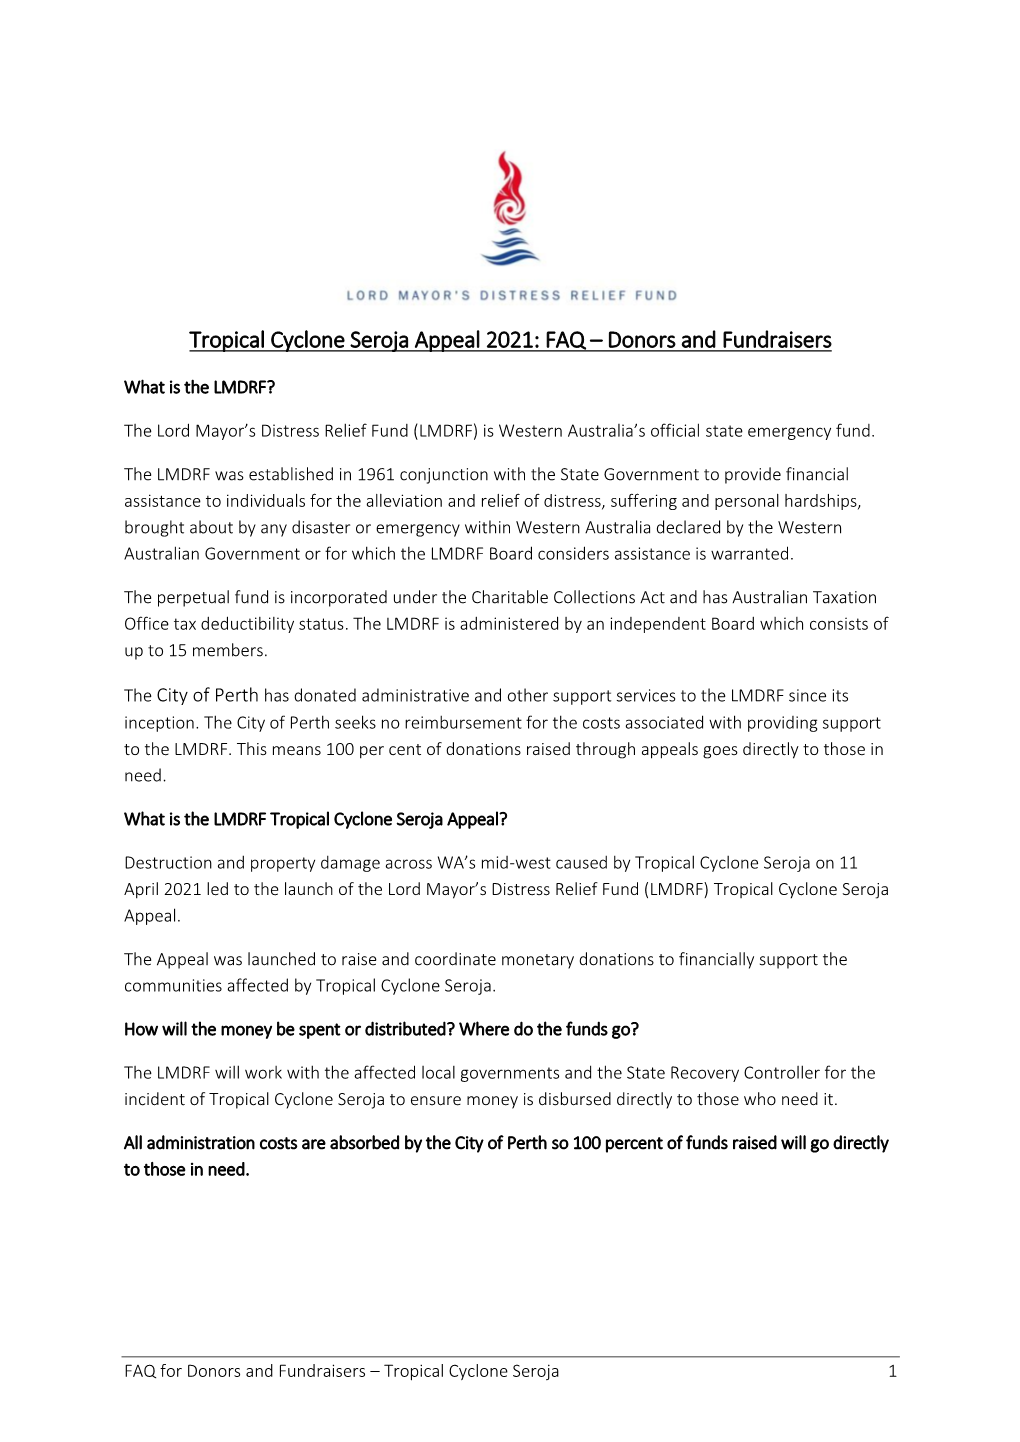 Tropical Cyclone Seroja Appeal 2021: FAQ – Donors and Fundraisers